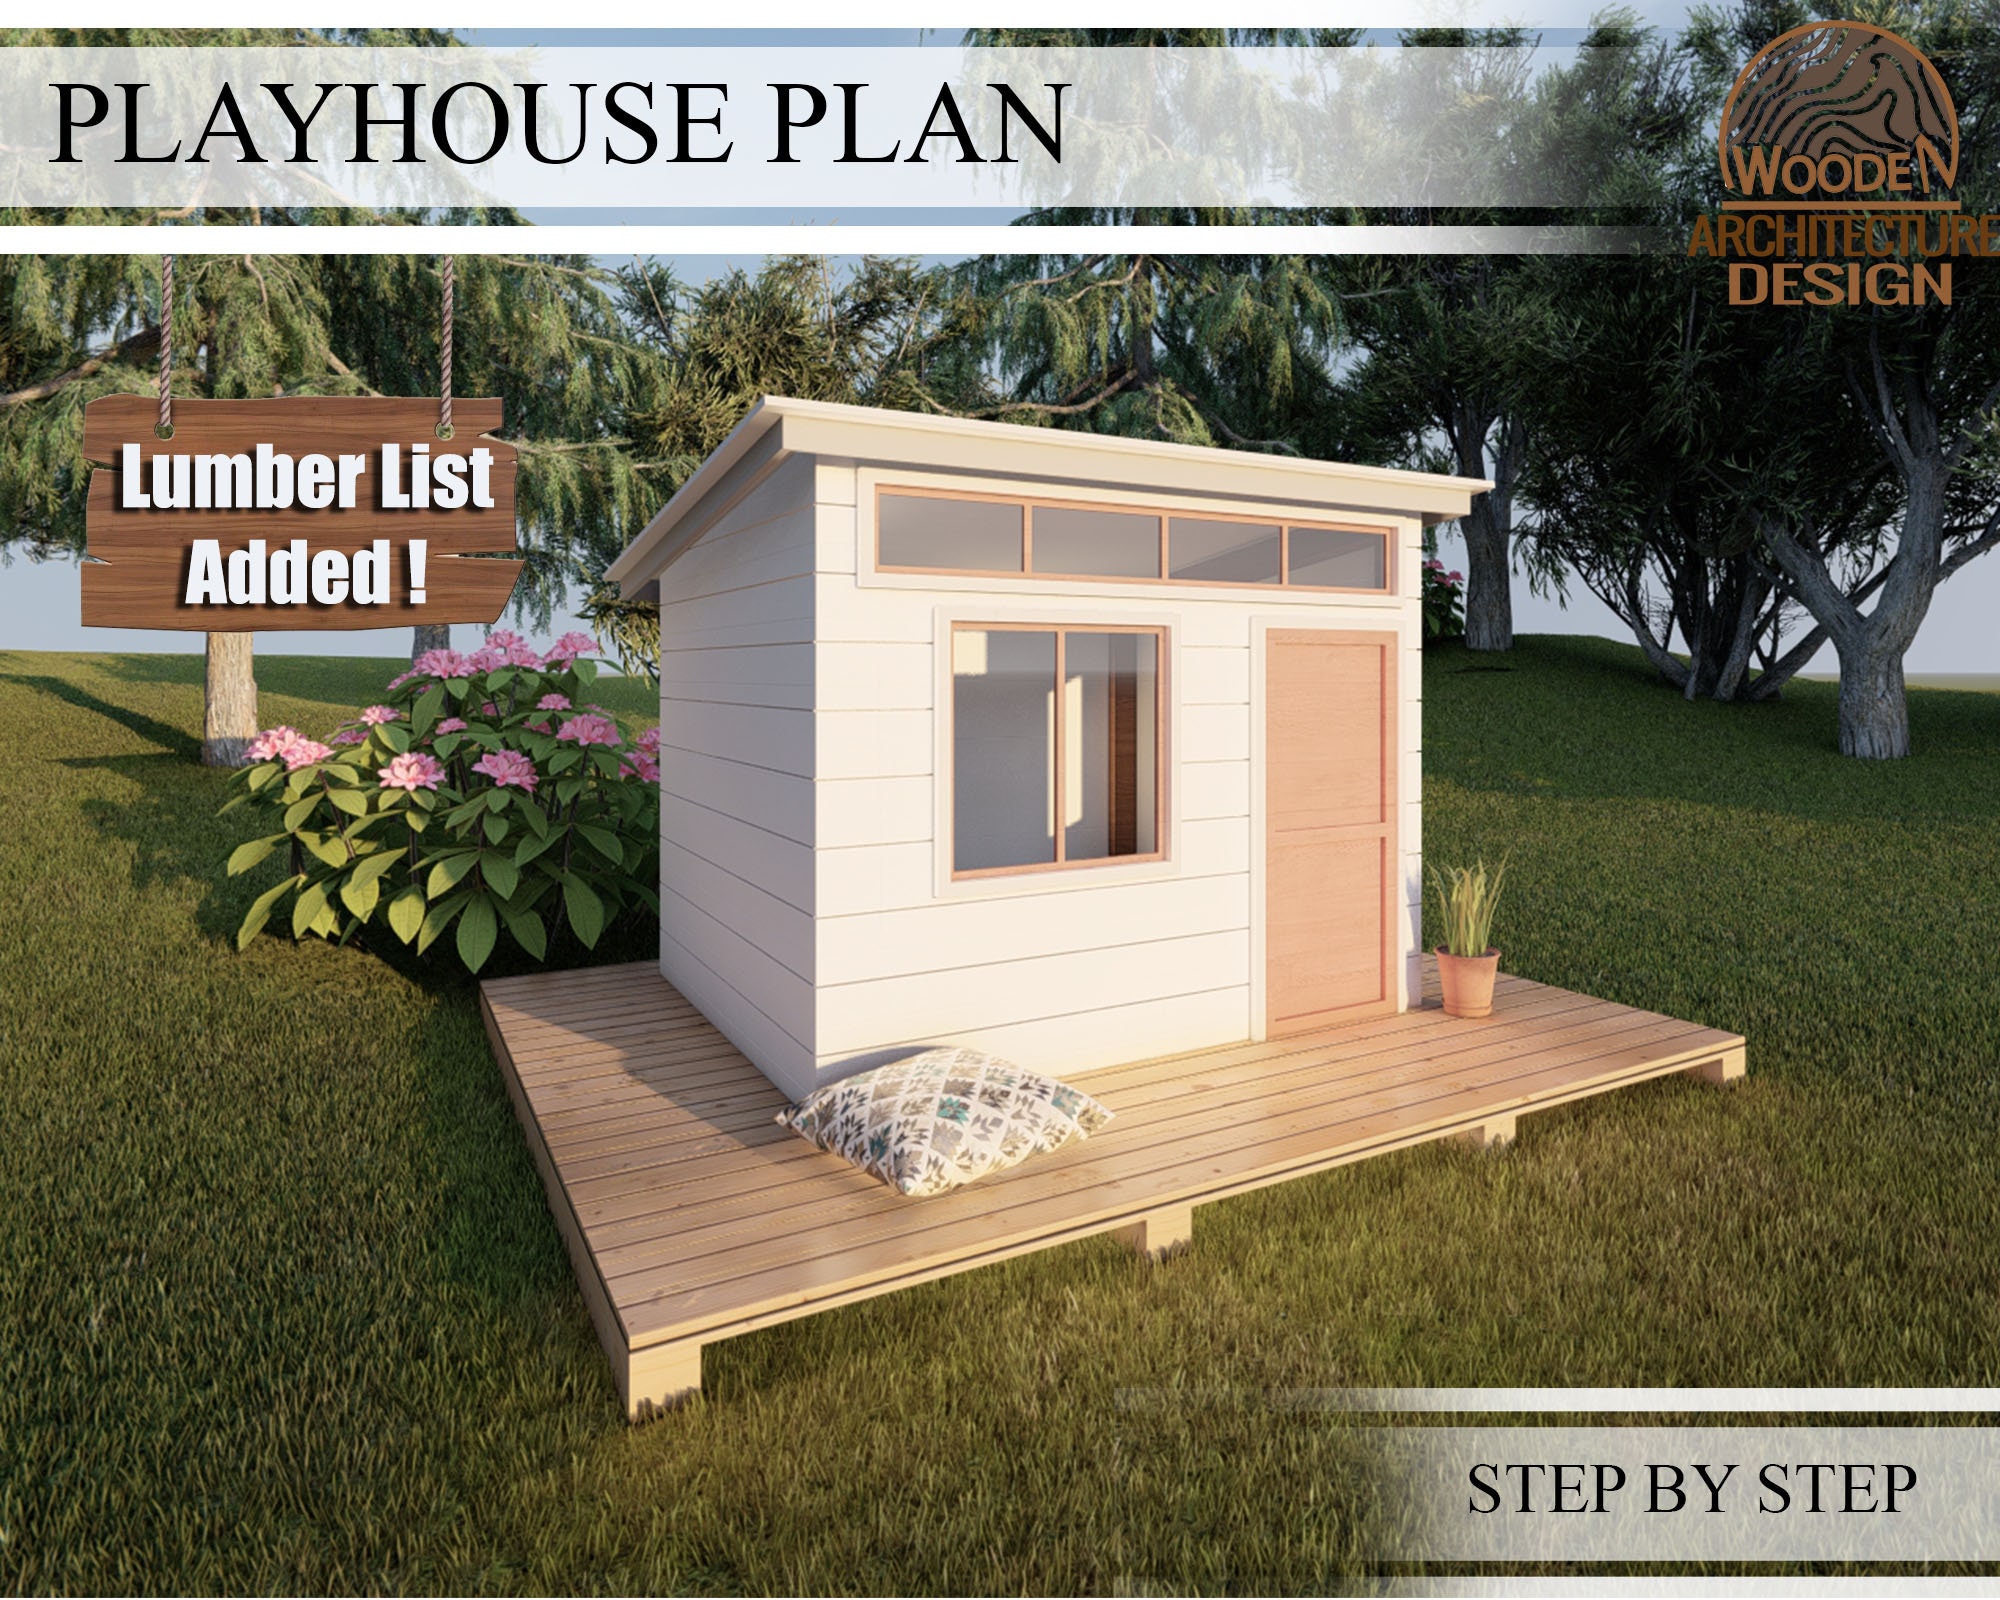 Playhouse plans for for sale  